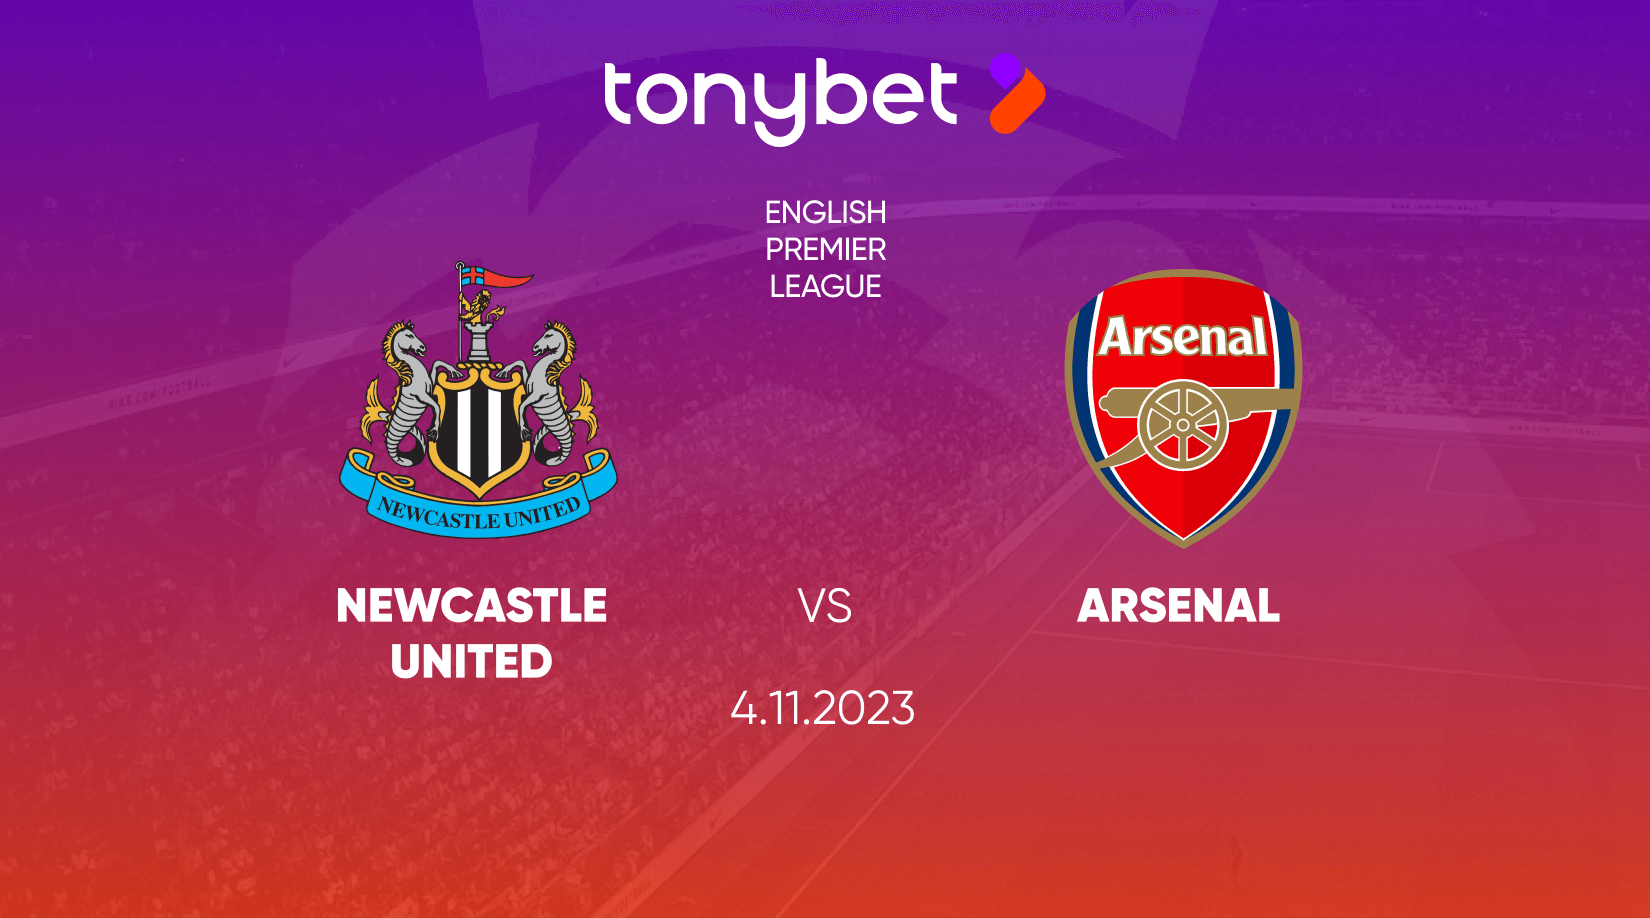 Explore expert predictions, betting tips, and key trends in our Arsenal vs. Newcastle match preview. Find out if Arsenal's winning streak will continue or if Newcastle will rise to the challenge.